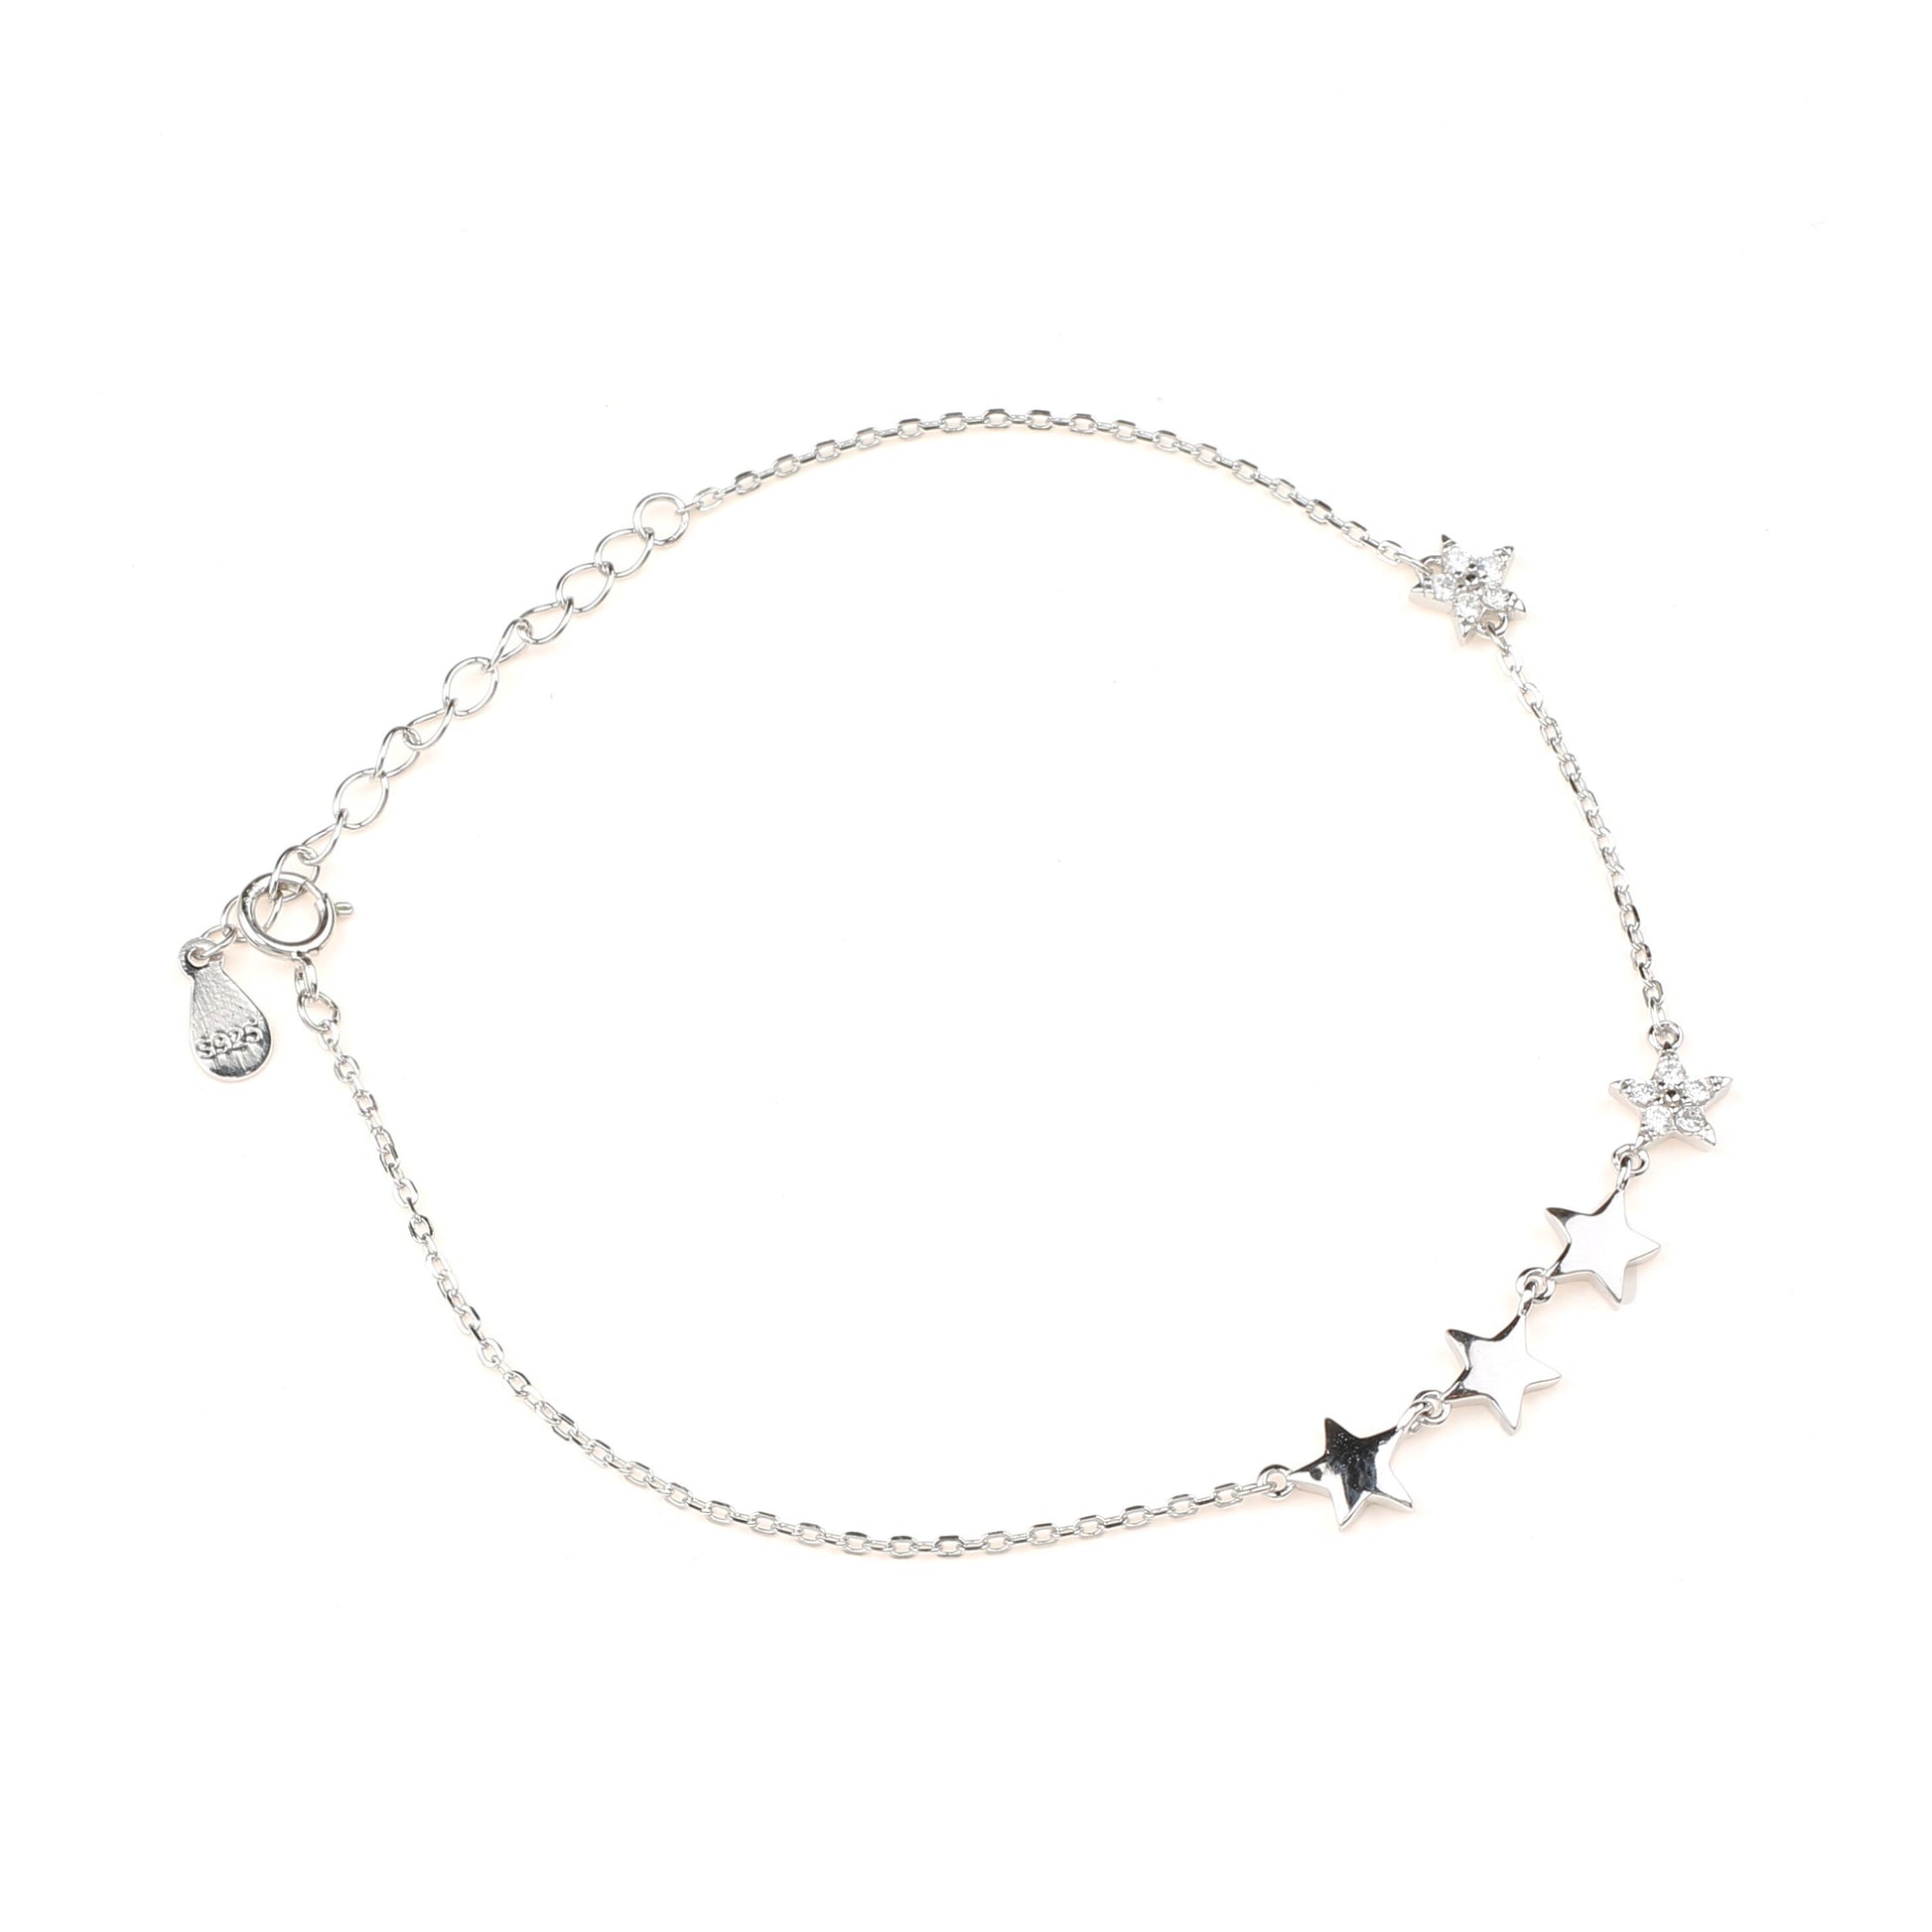 Stars in Sequence white stone studded 925 sterling silver link bracelet for women